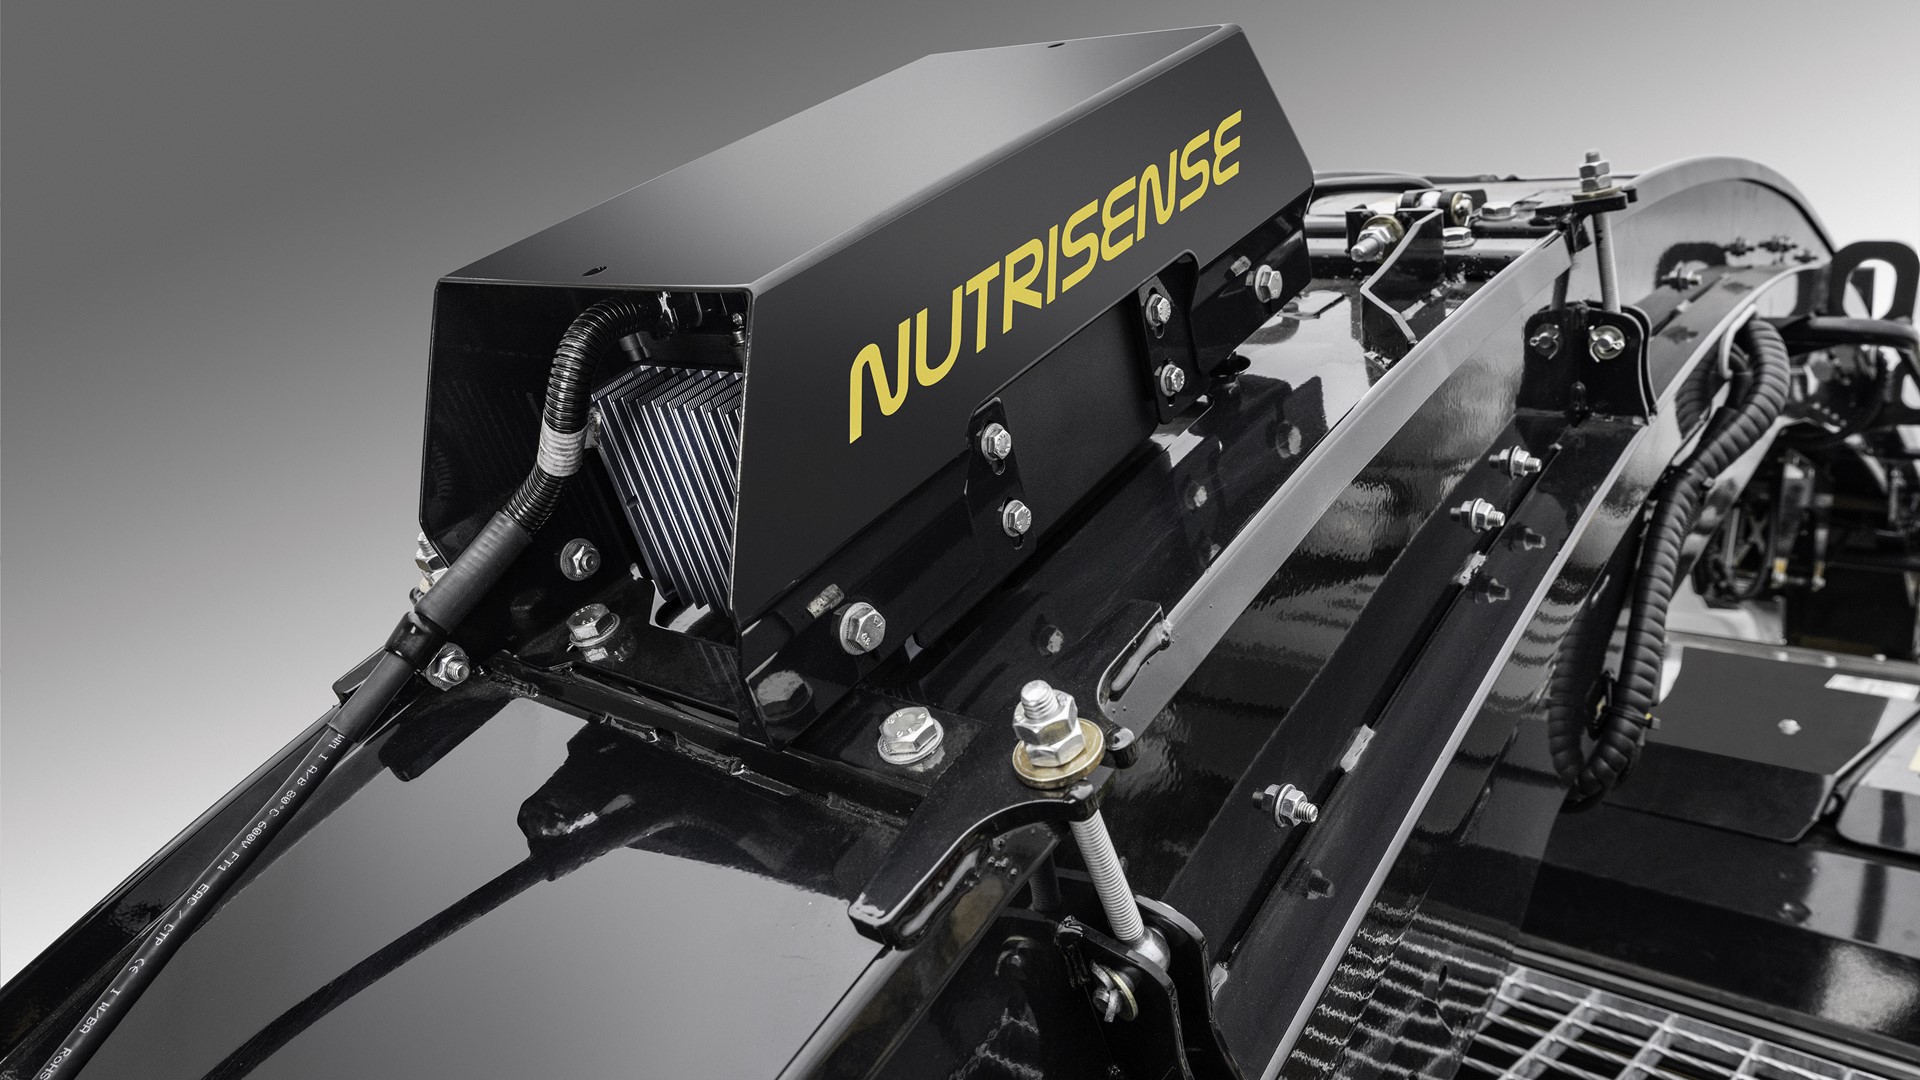 New Holland NutriSense nutrient analysis technology helps farmers make informed decisions to market